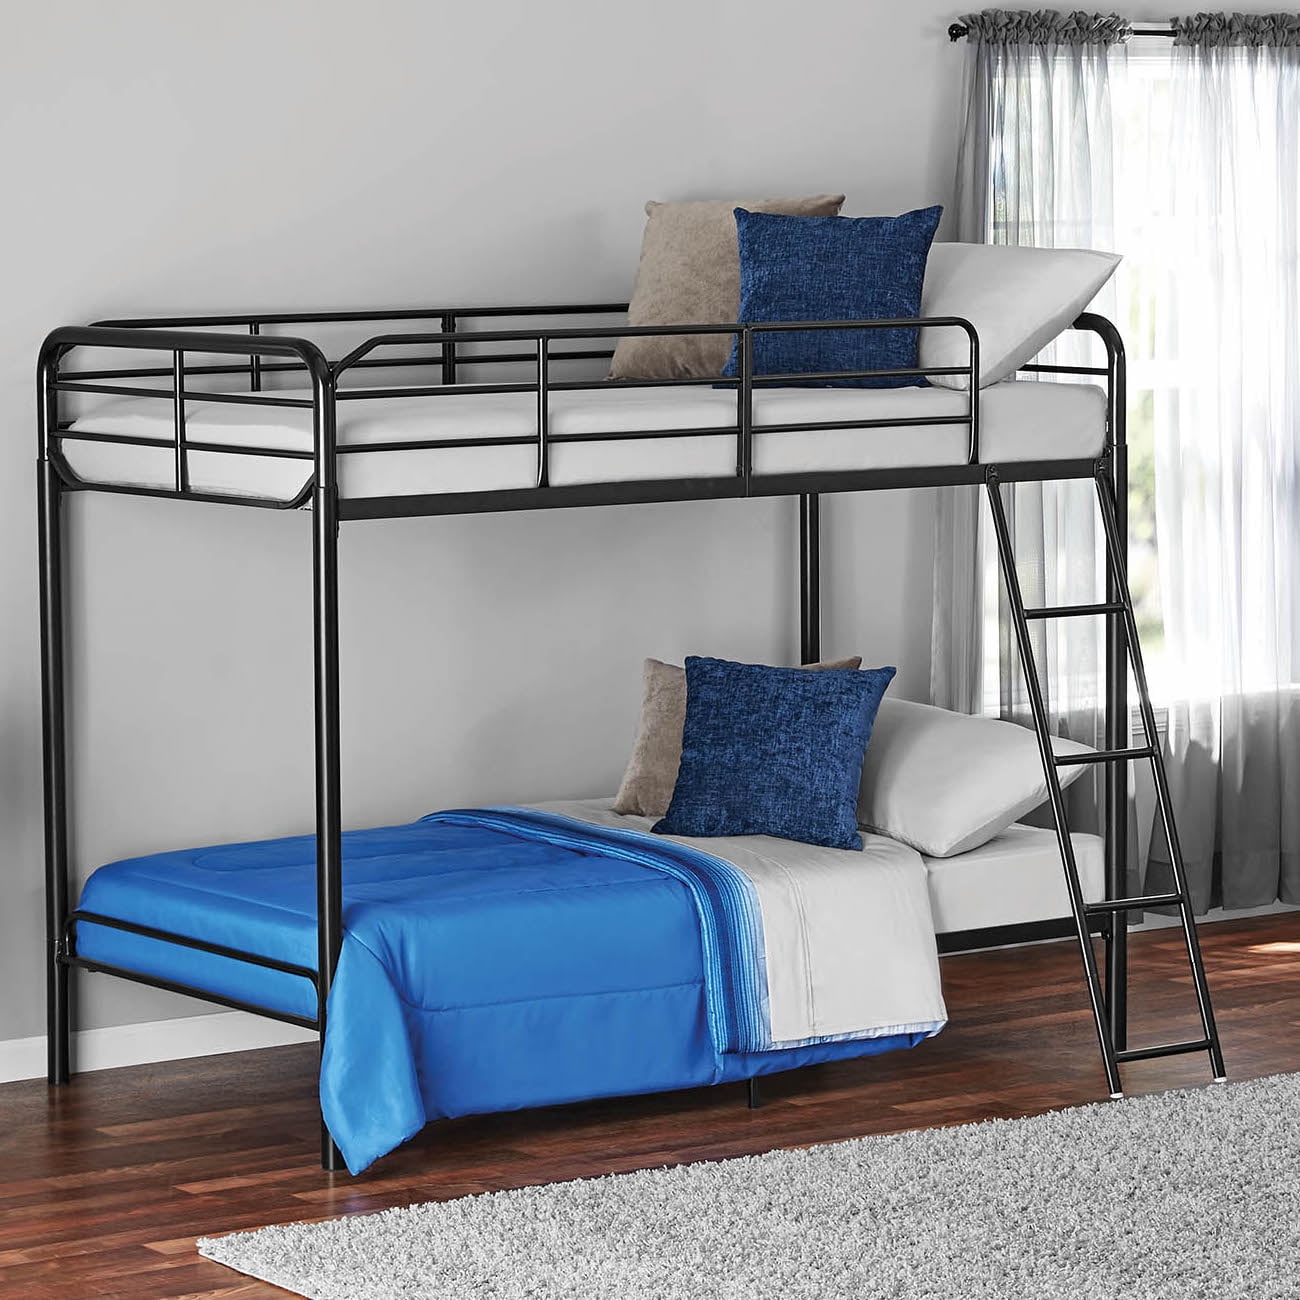 Mainstays Twin Over Metal Bunk Bed, Instructions On How To Put A Metal Loft Bed Together